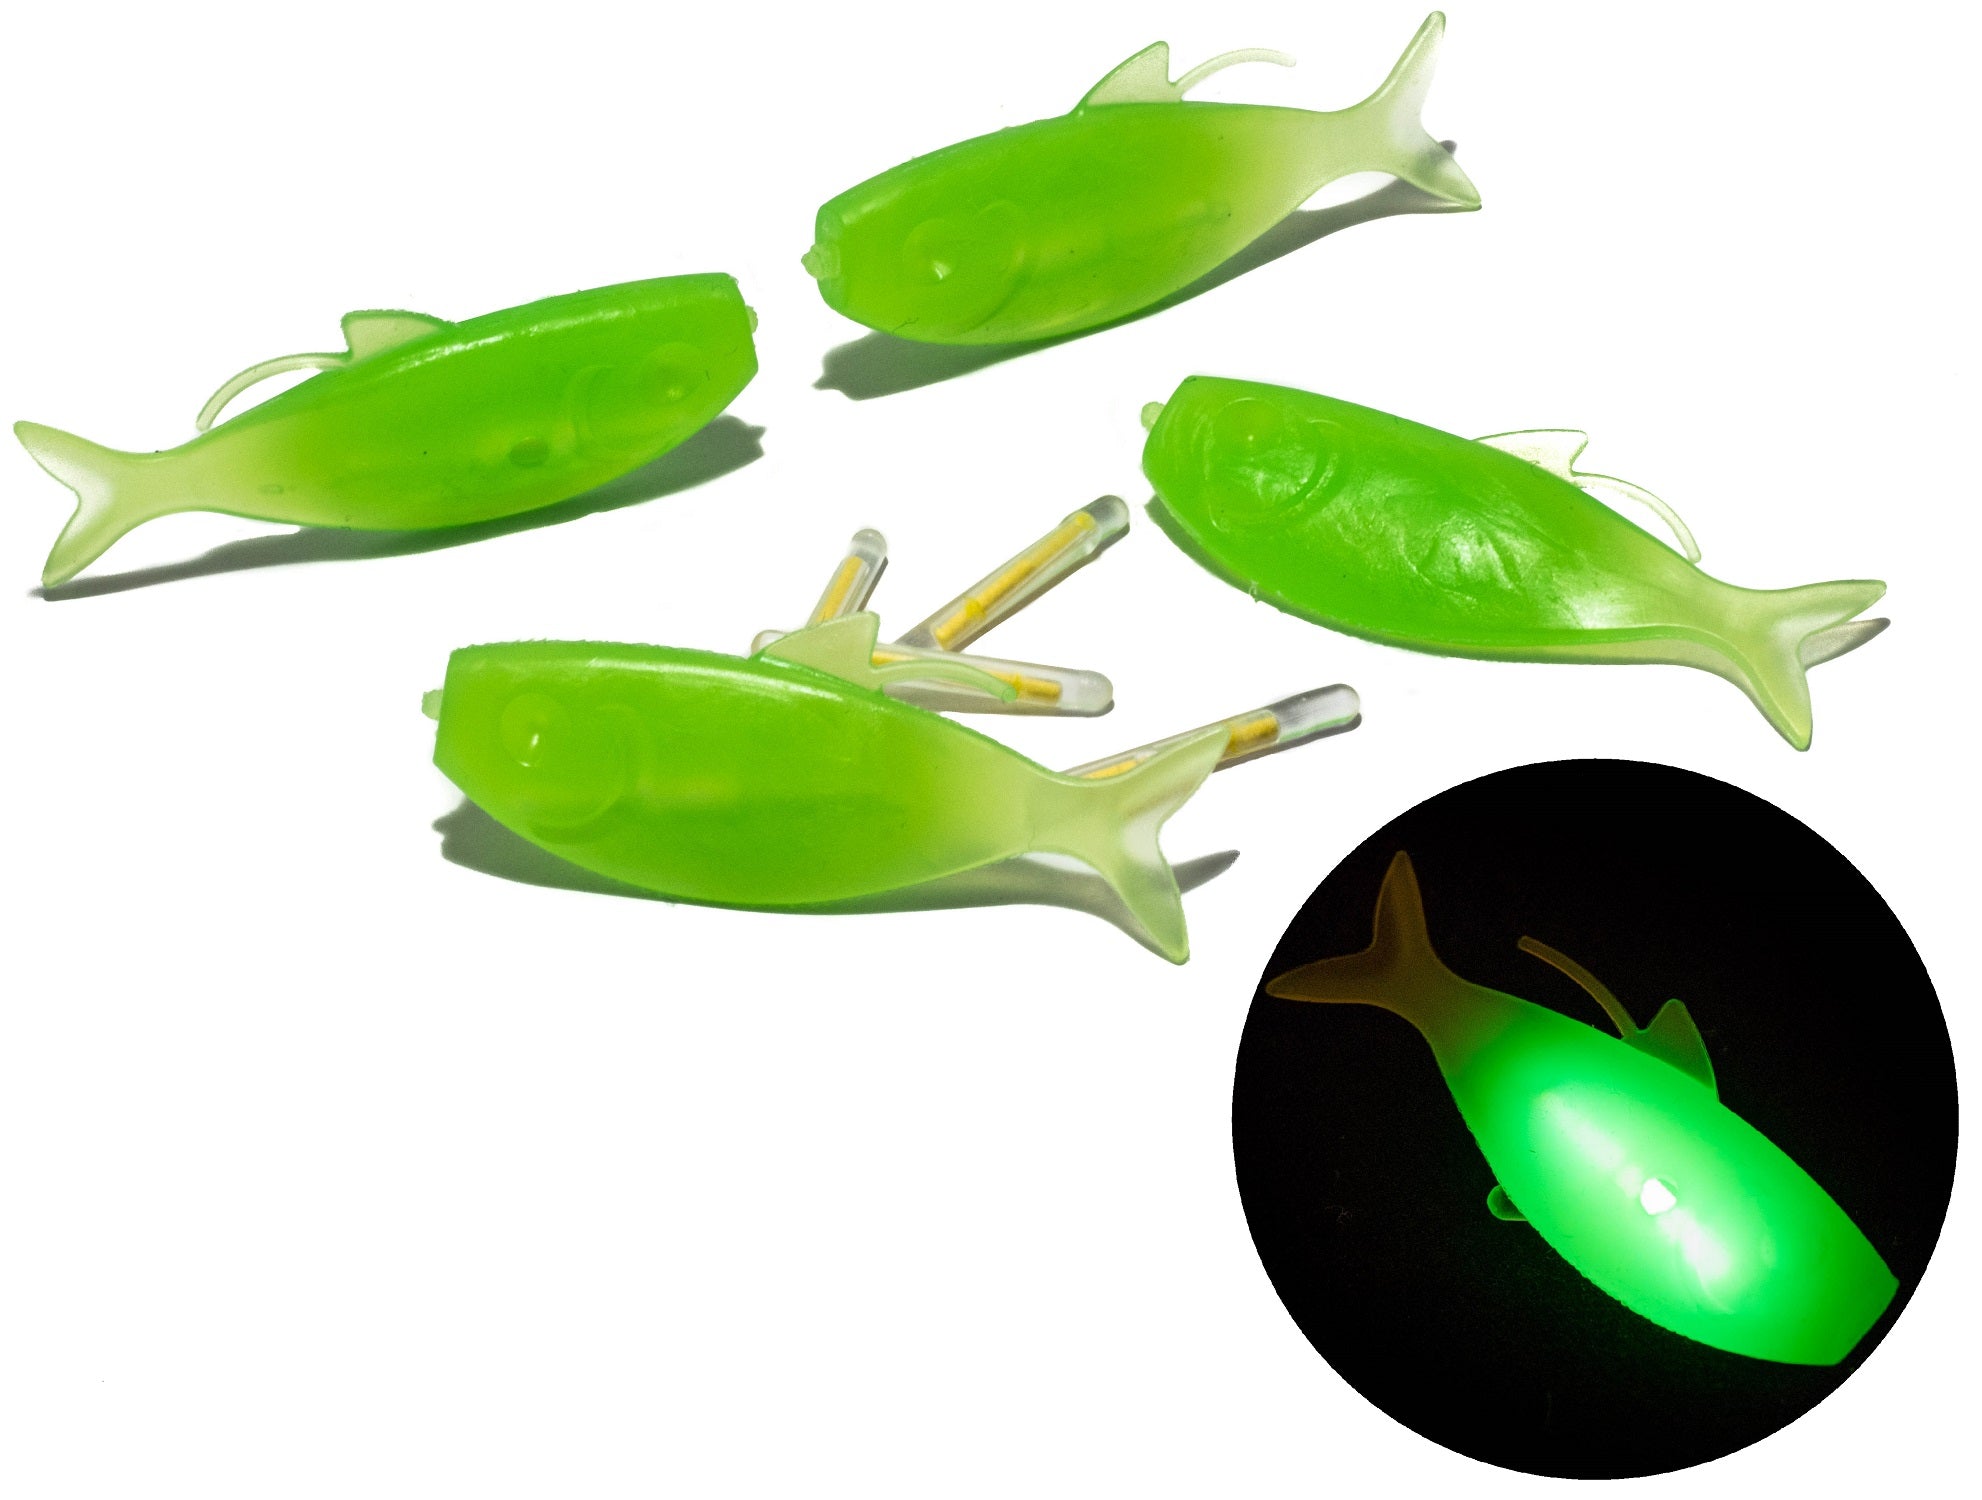 Fishing Shads 1.8” long (4 pack) - Glows in the dark, Soft plastic